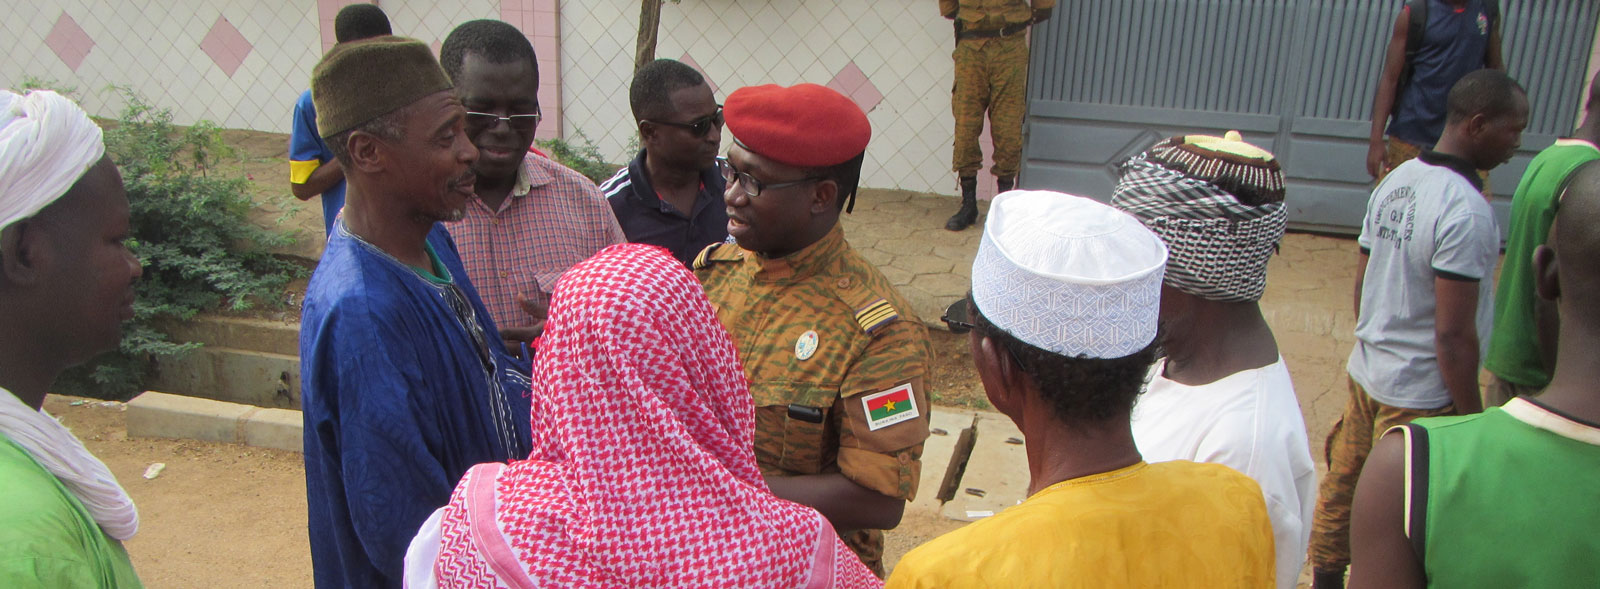 Help a US Army team build credible partners and promote community engagement in Burkina Faso